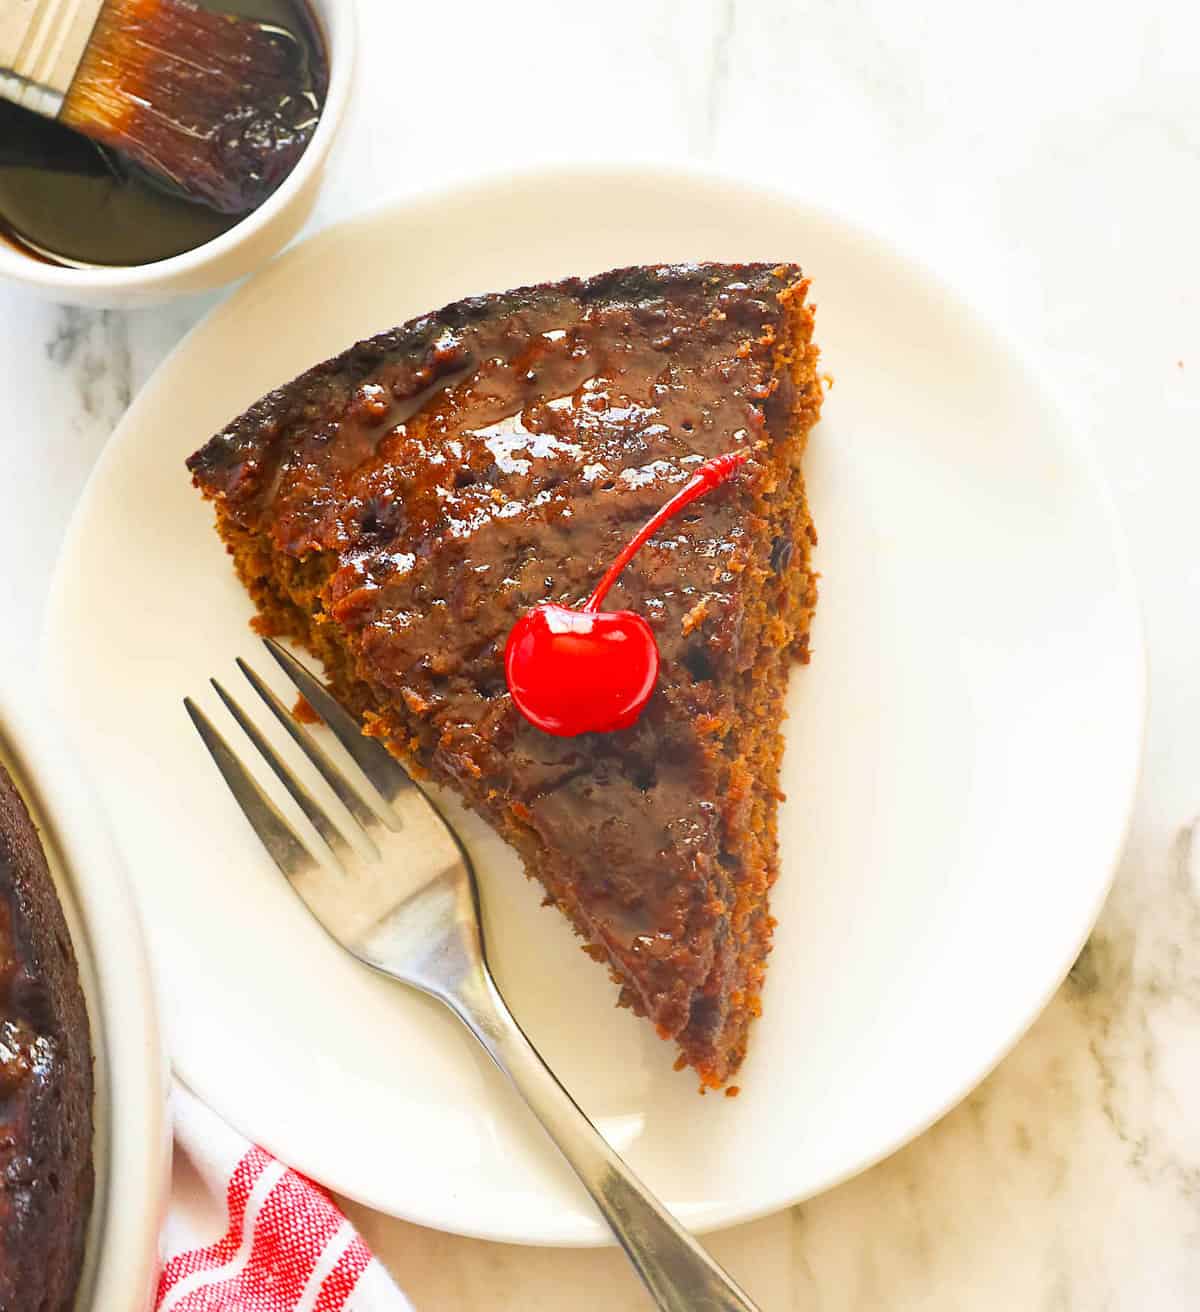 A decadent slice of Caribbean black cake with a cherry on top